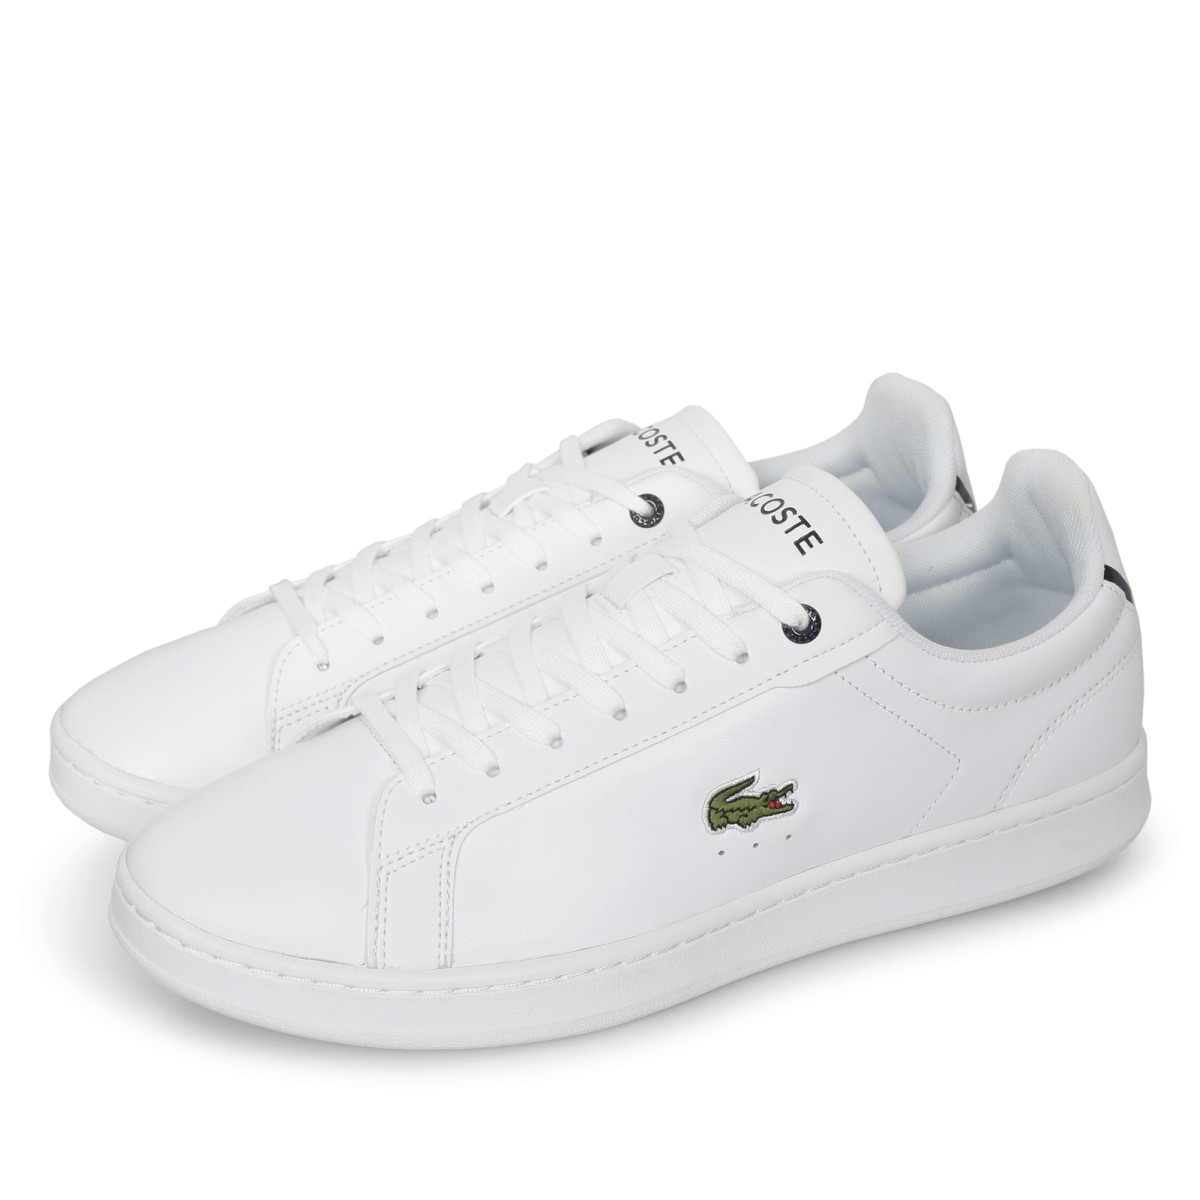 Lacoste Lacoste CARNABY PRO BL23 Λευκό